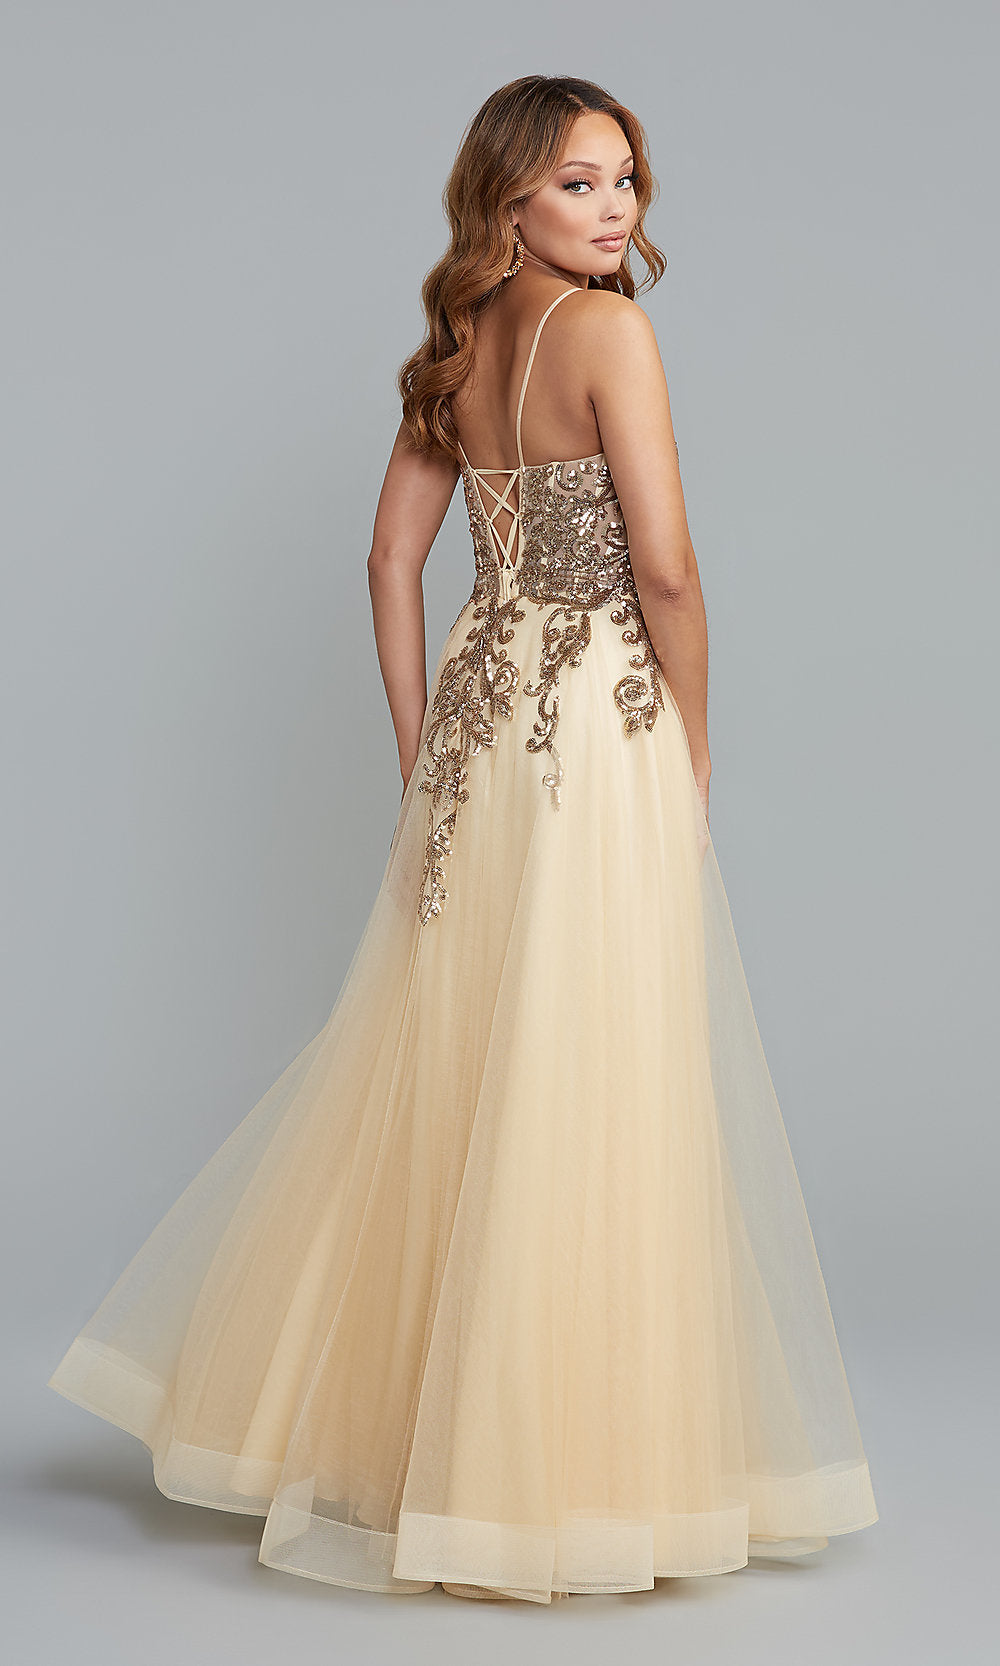  Long A-Line Prom Dress with Metallic Sheer Bodice